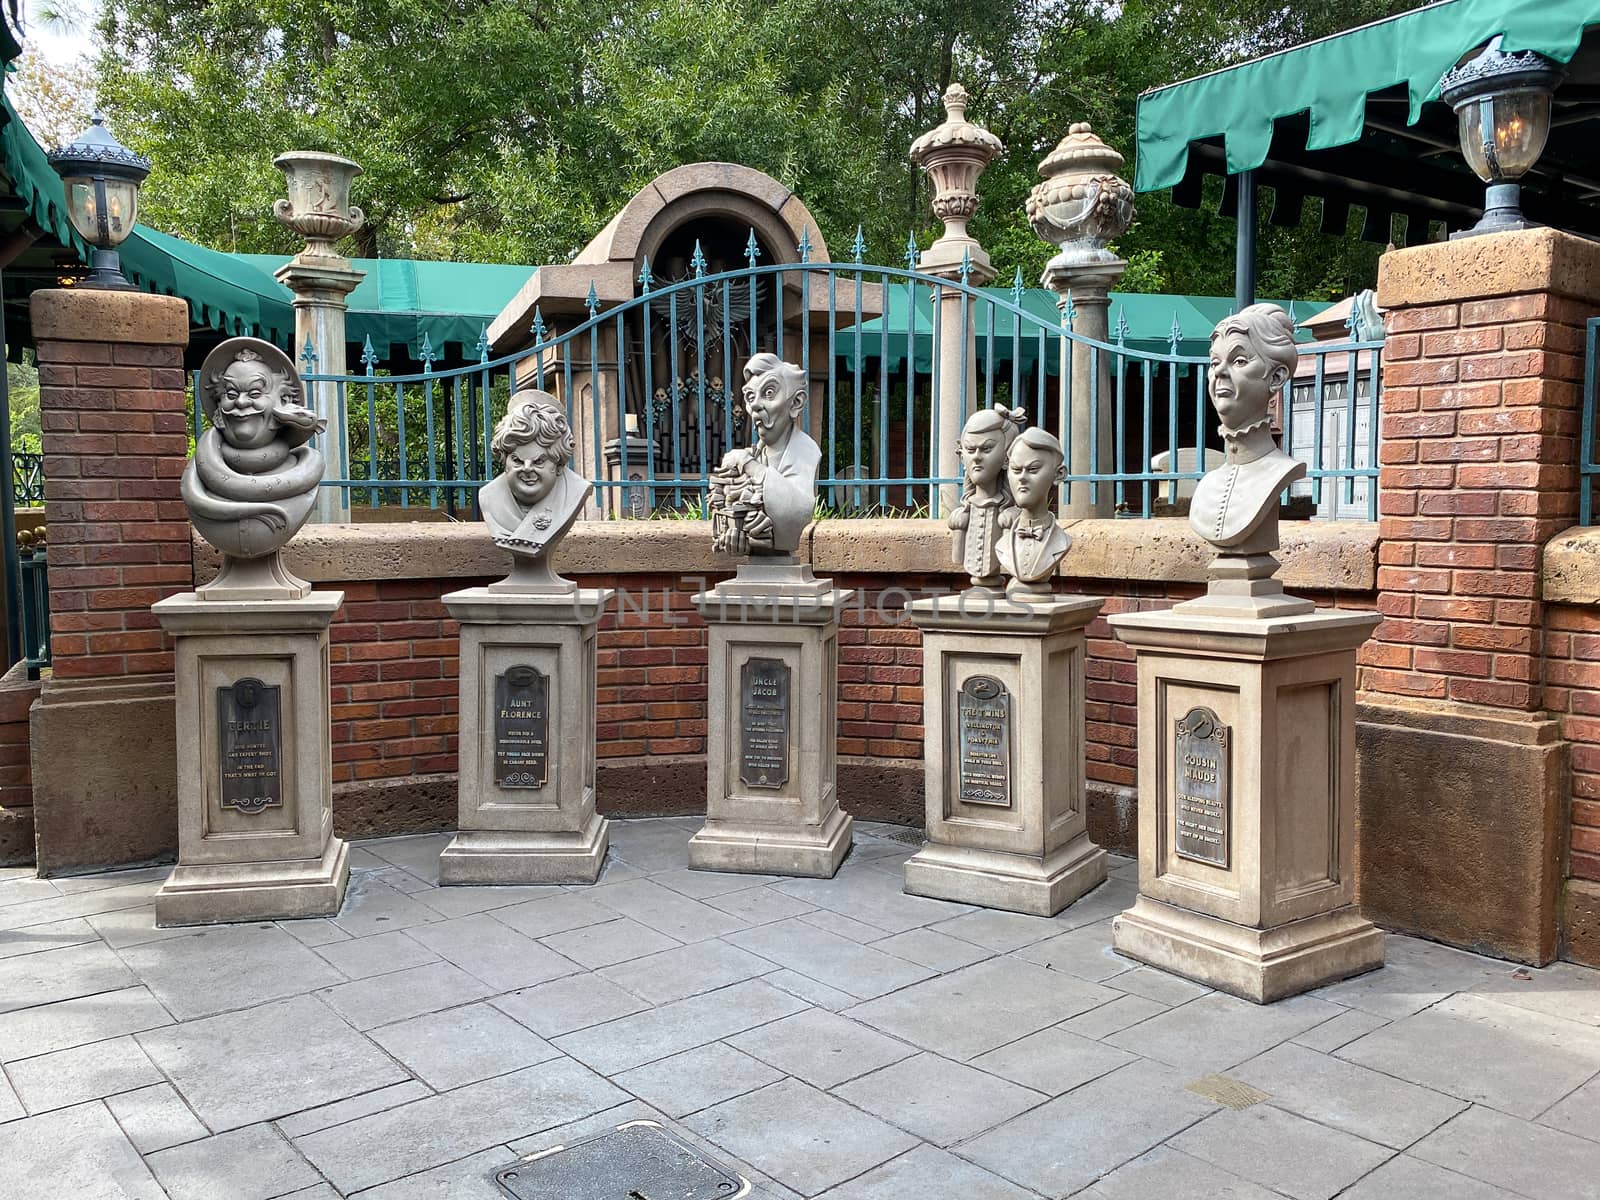 Orlando,FL/USA-10/21/20: The statues of ghosts outside of the Haunted Mansion ride in the Magic Kingdom at  Walt Disney World Resorts in Orlando, FL.